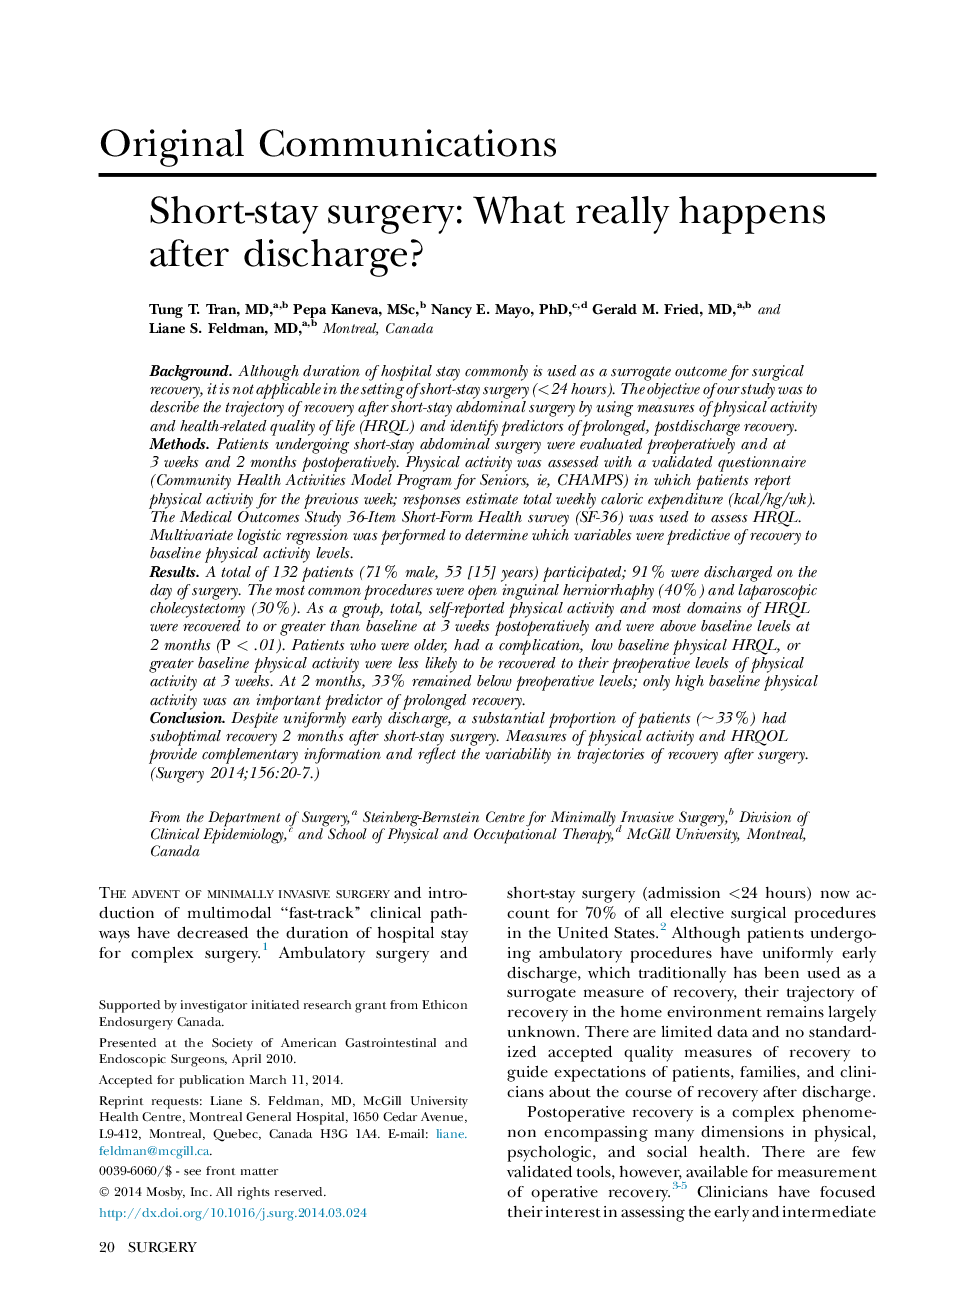 Short-stay surgery: What really happens after discharge? 